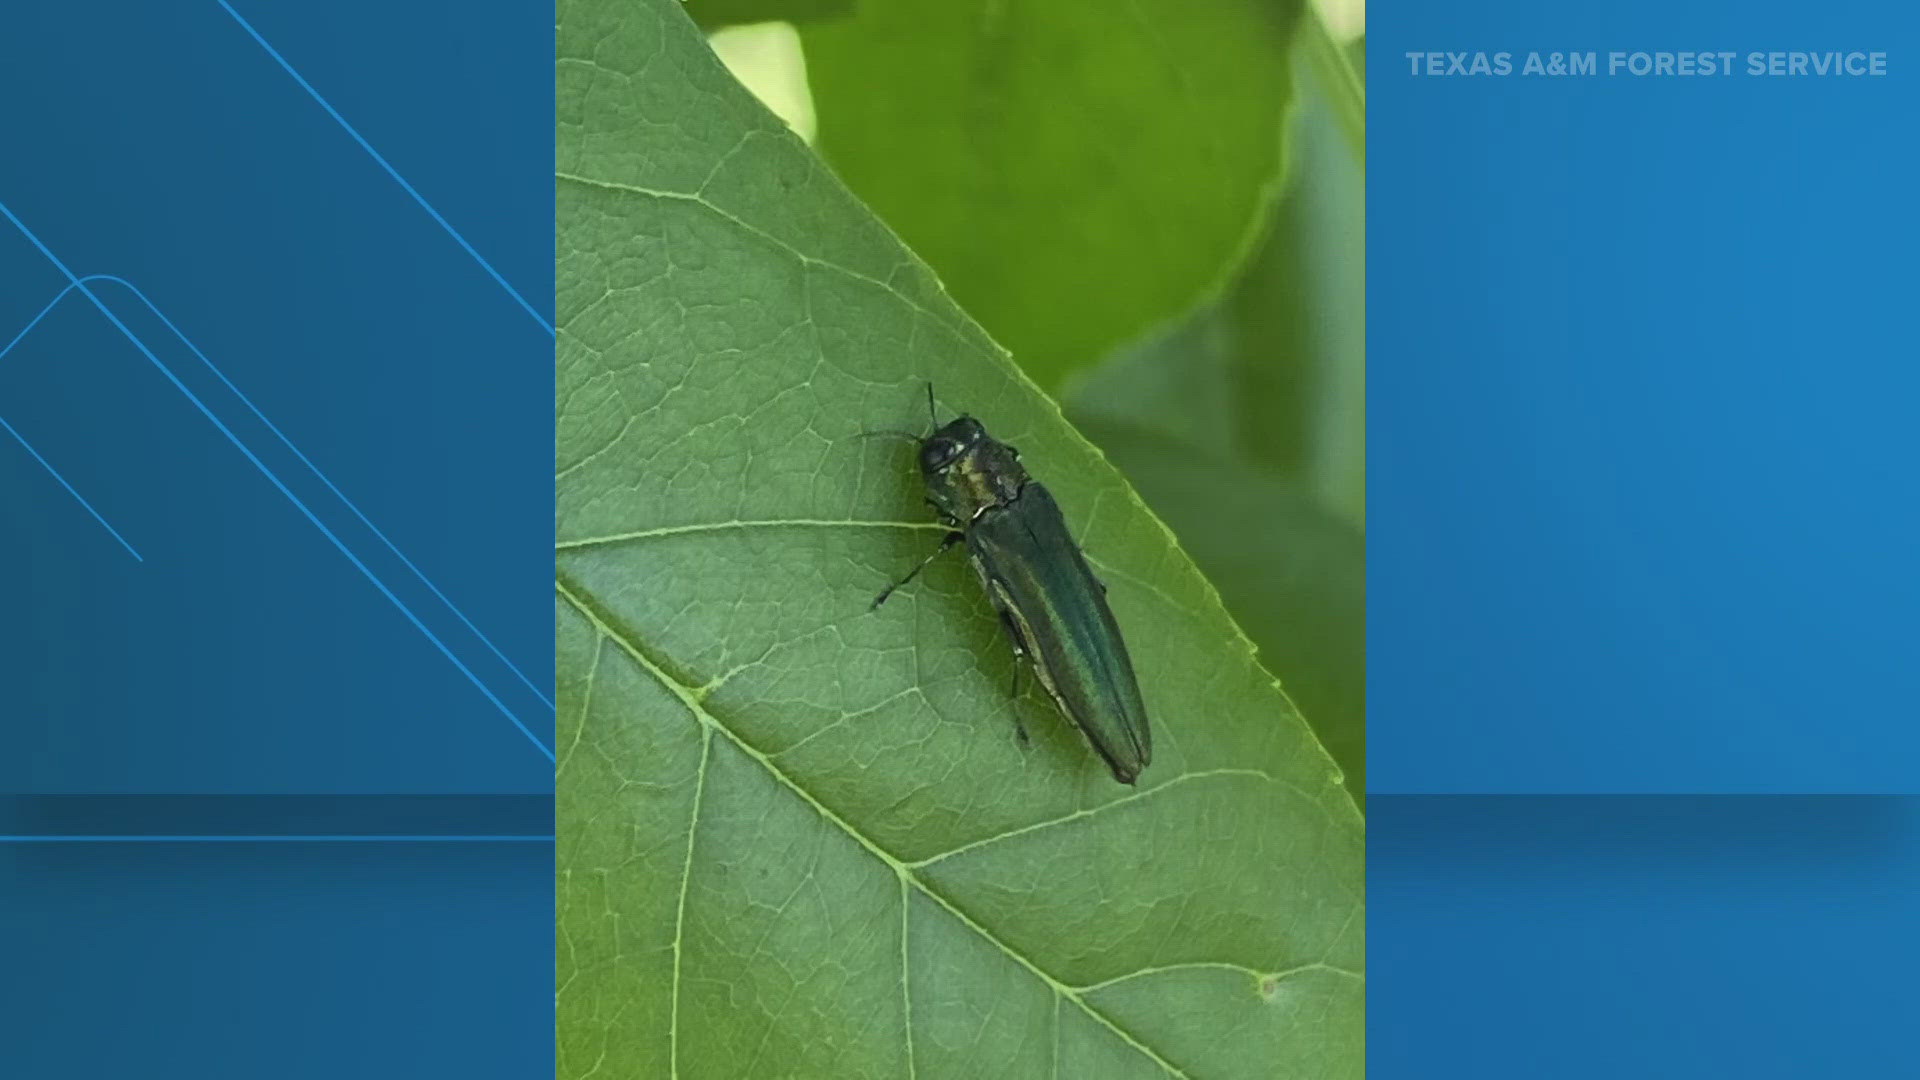 The emerald ash borer is considered one of the most invasive pests in the country.